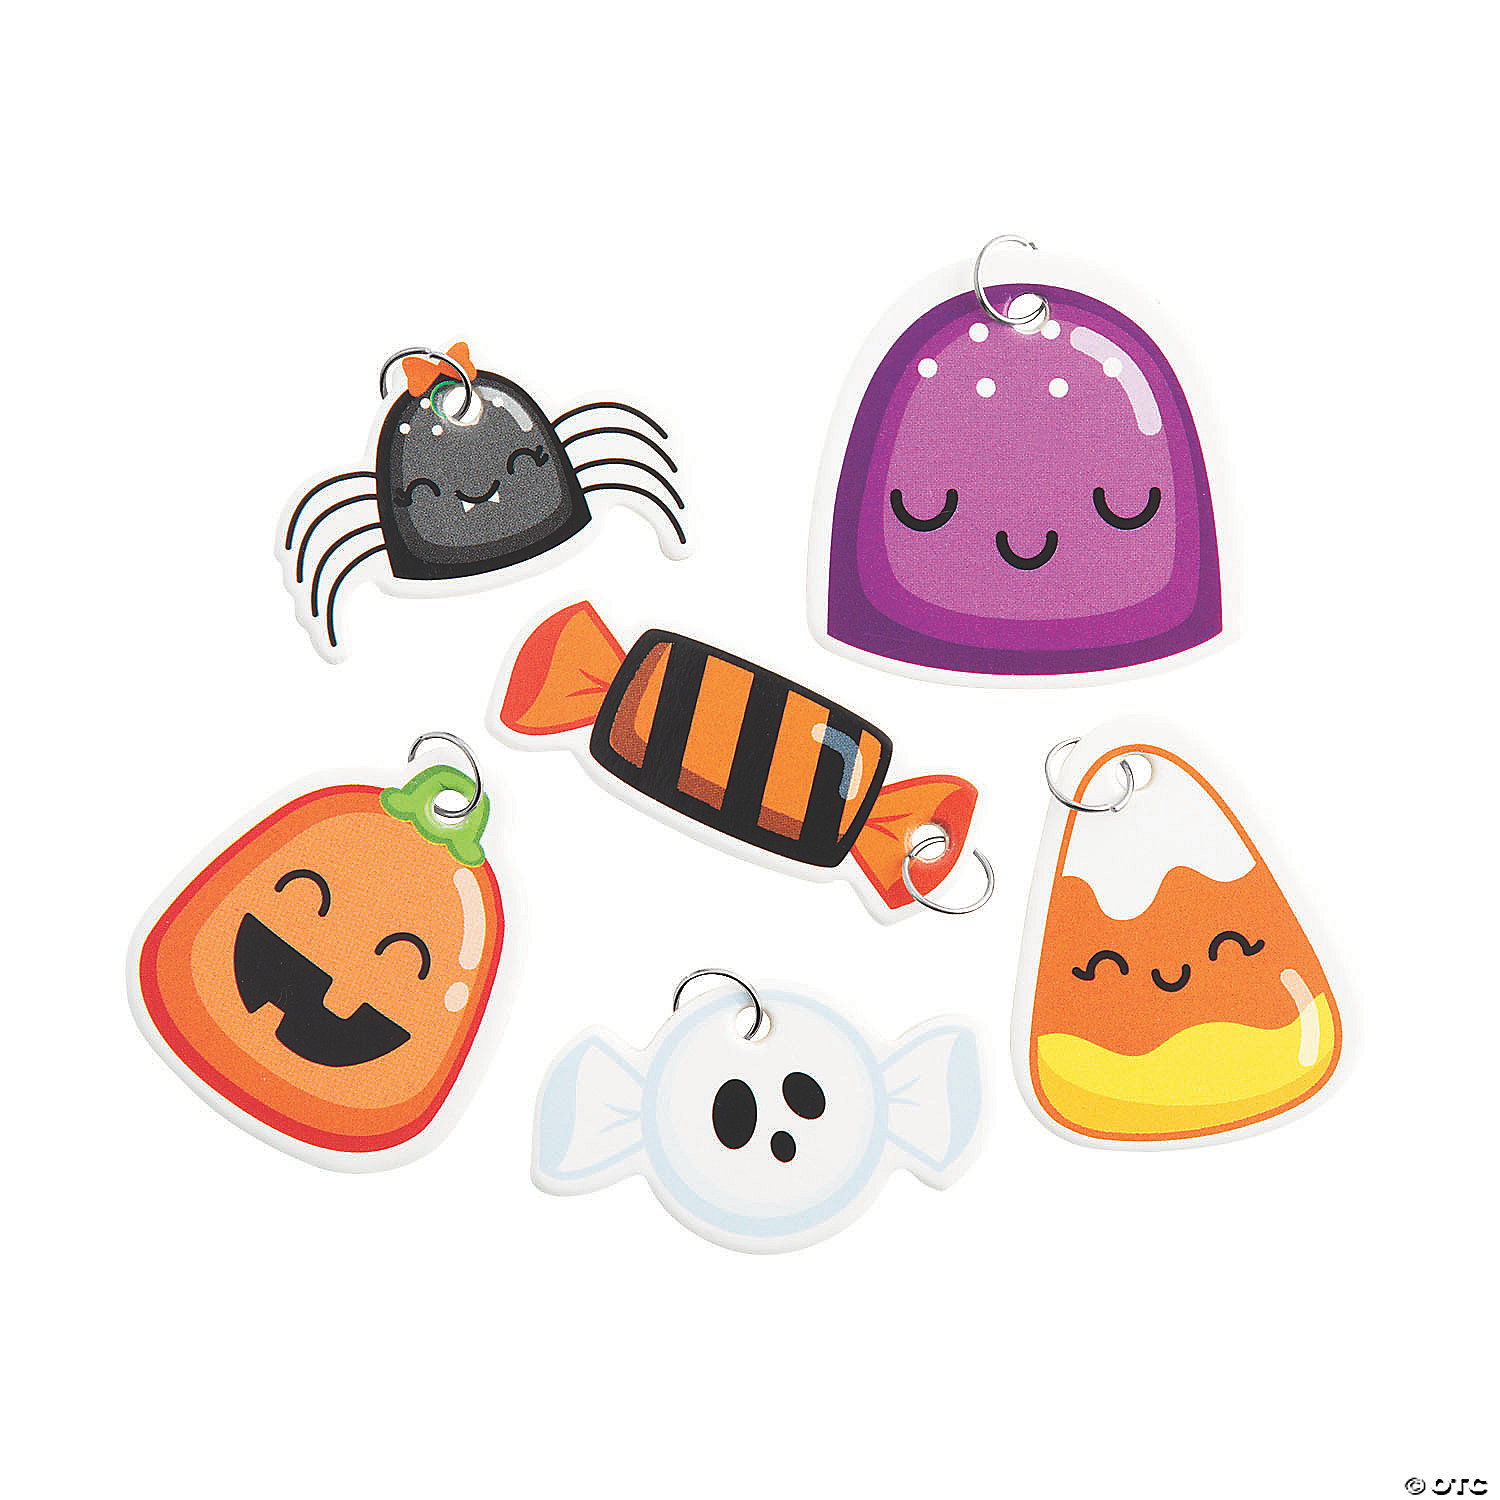 Candy-Shaped Halloween Charms - Discontinued